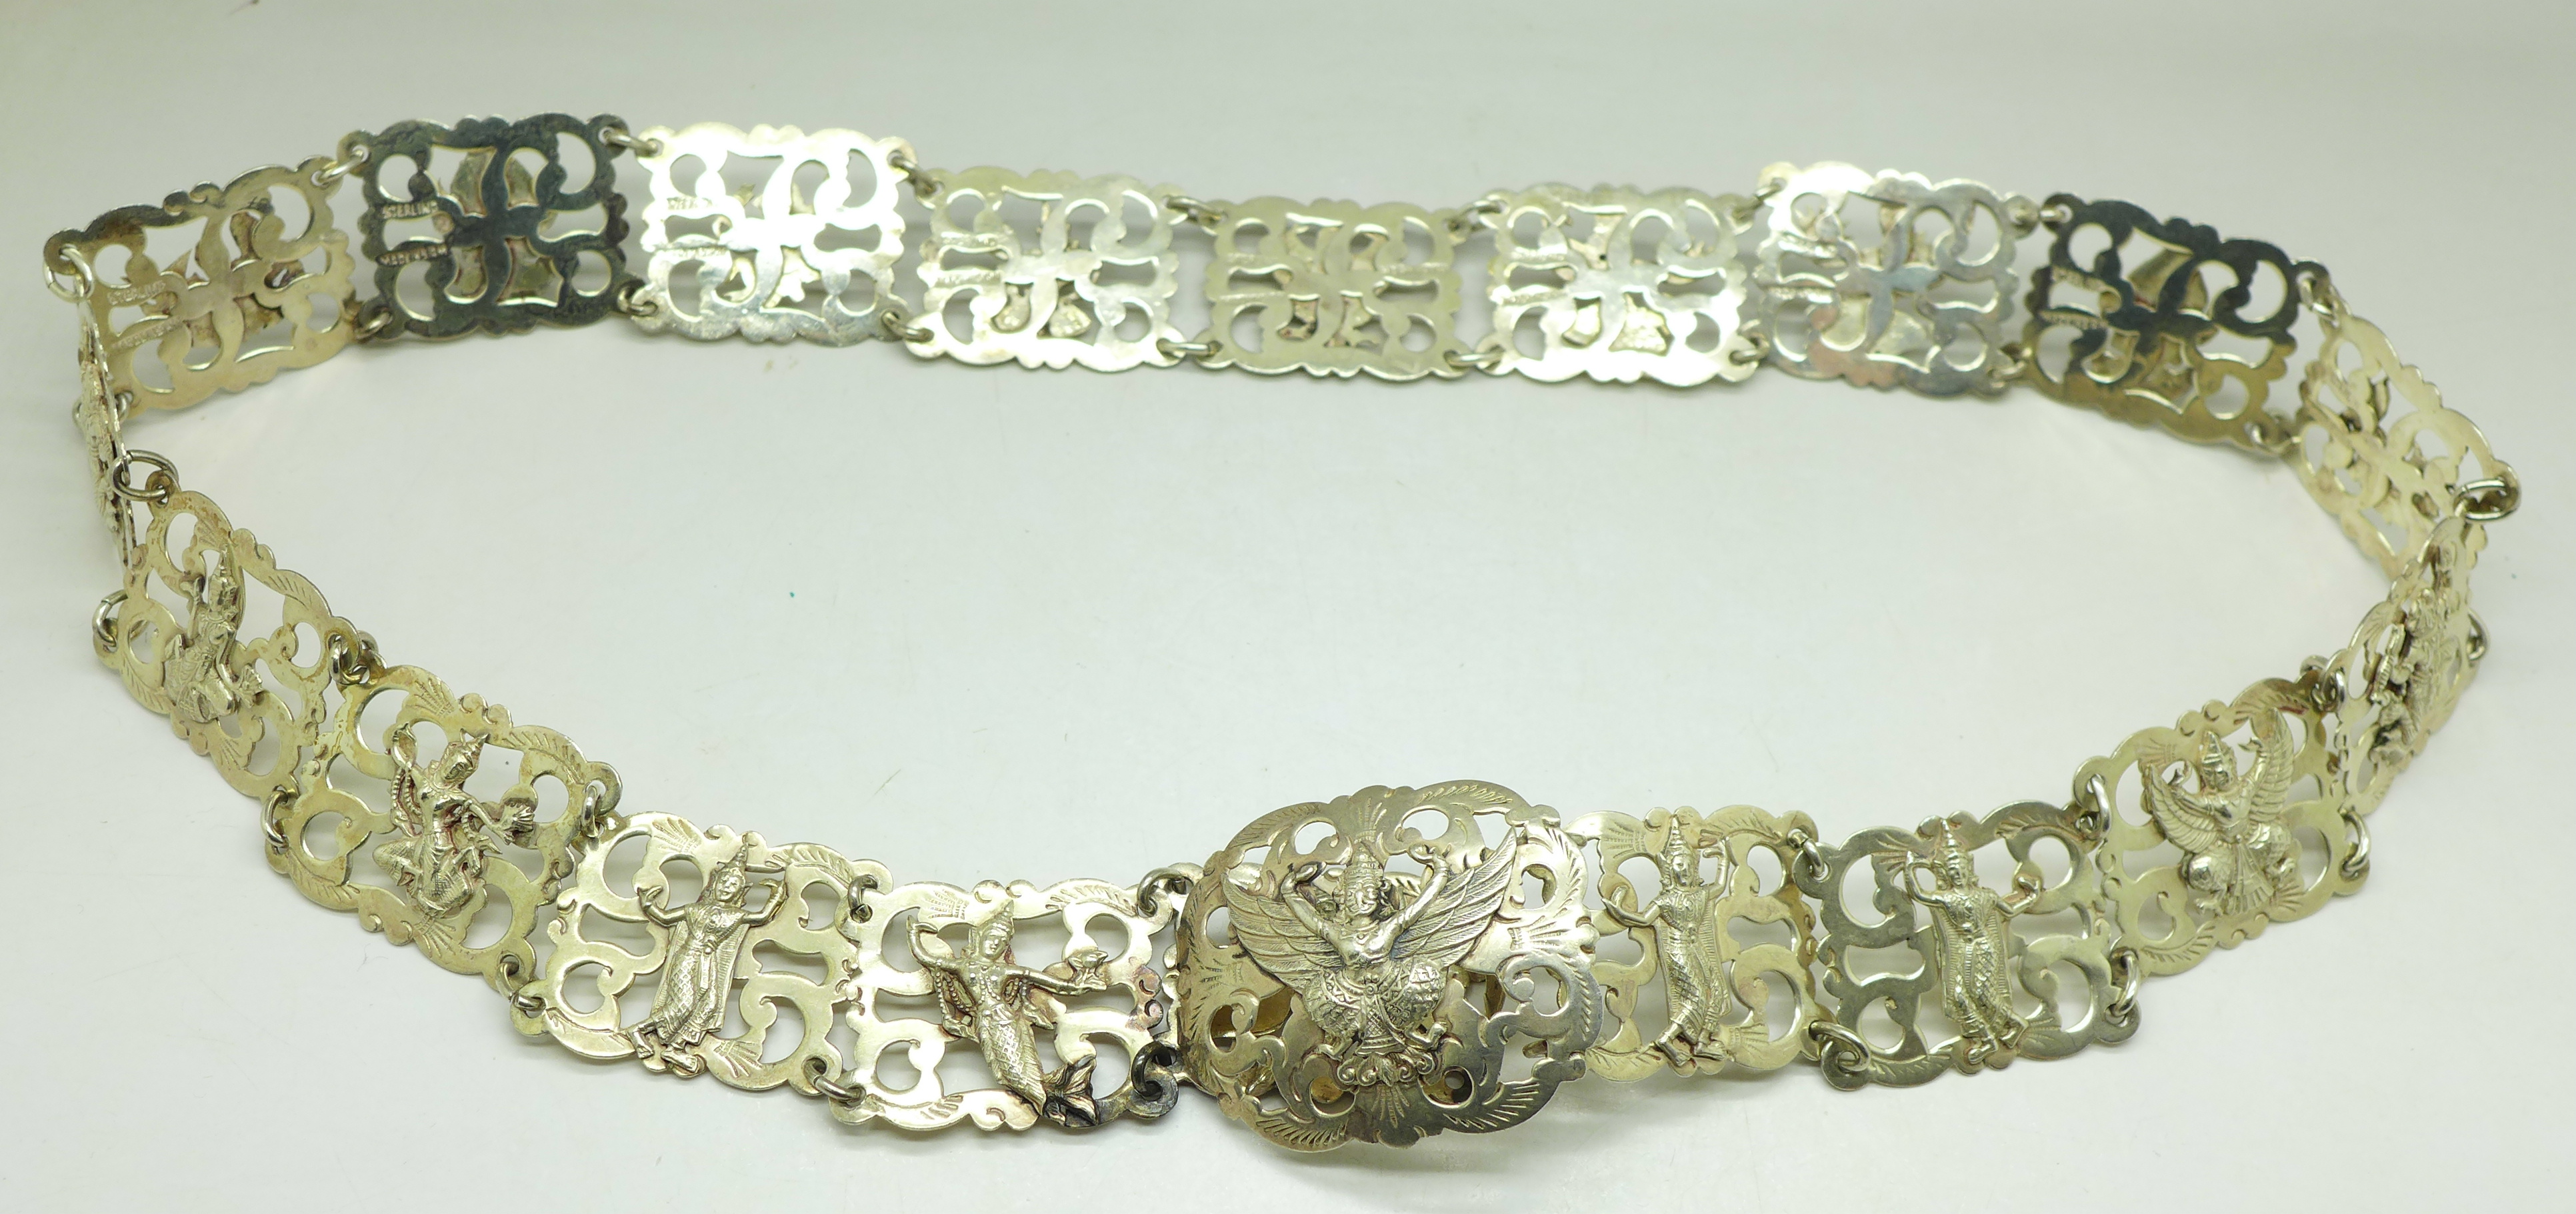 A Siam sterling silver belt, 193g, (fastening clip requires repair) - Image 2 of 8